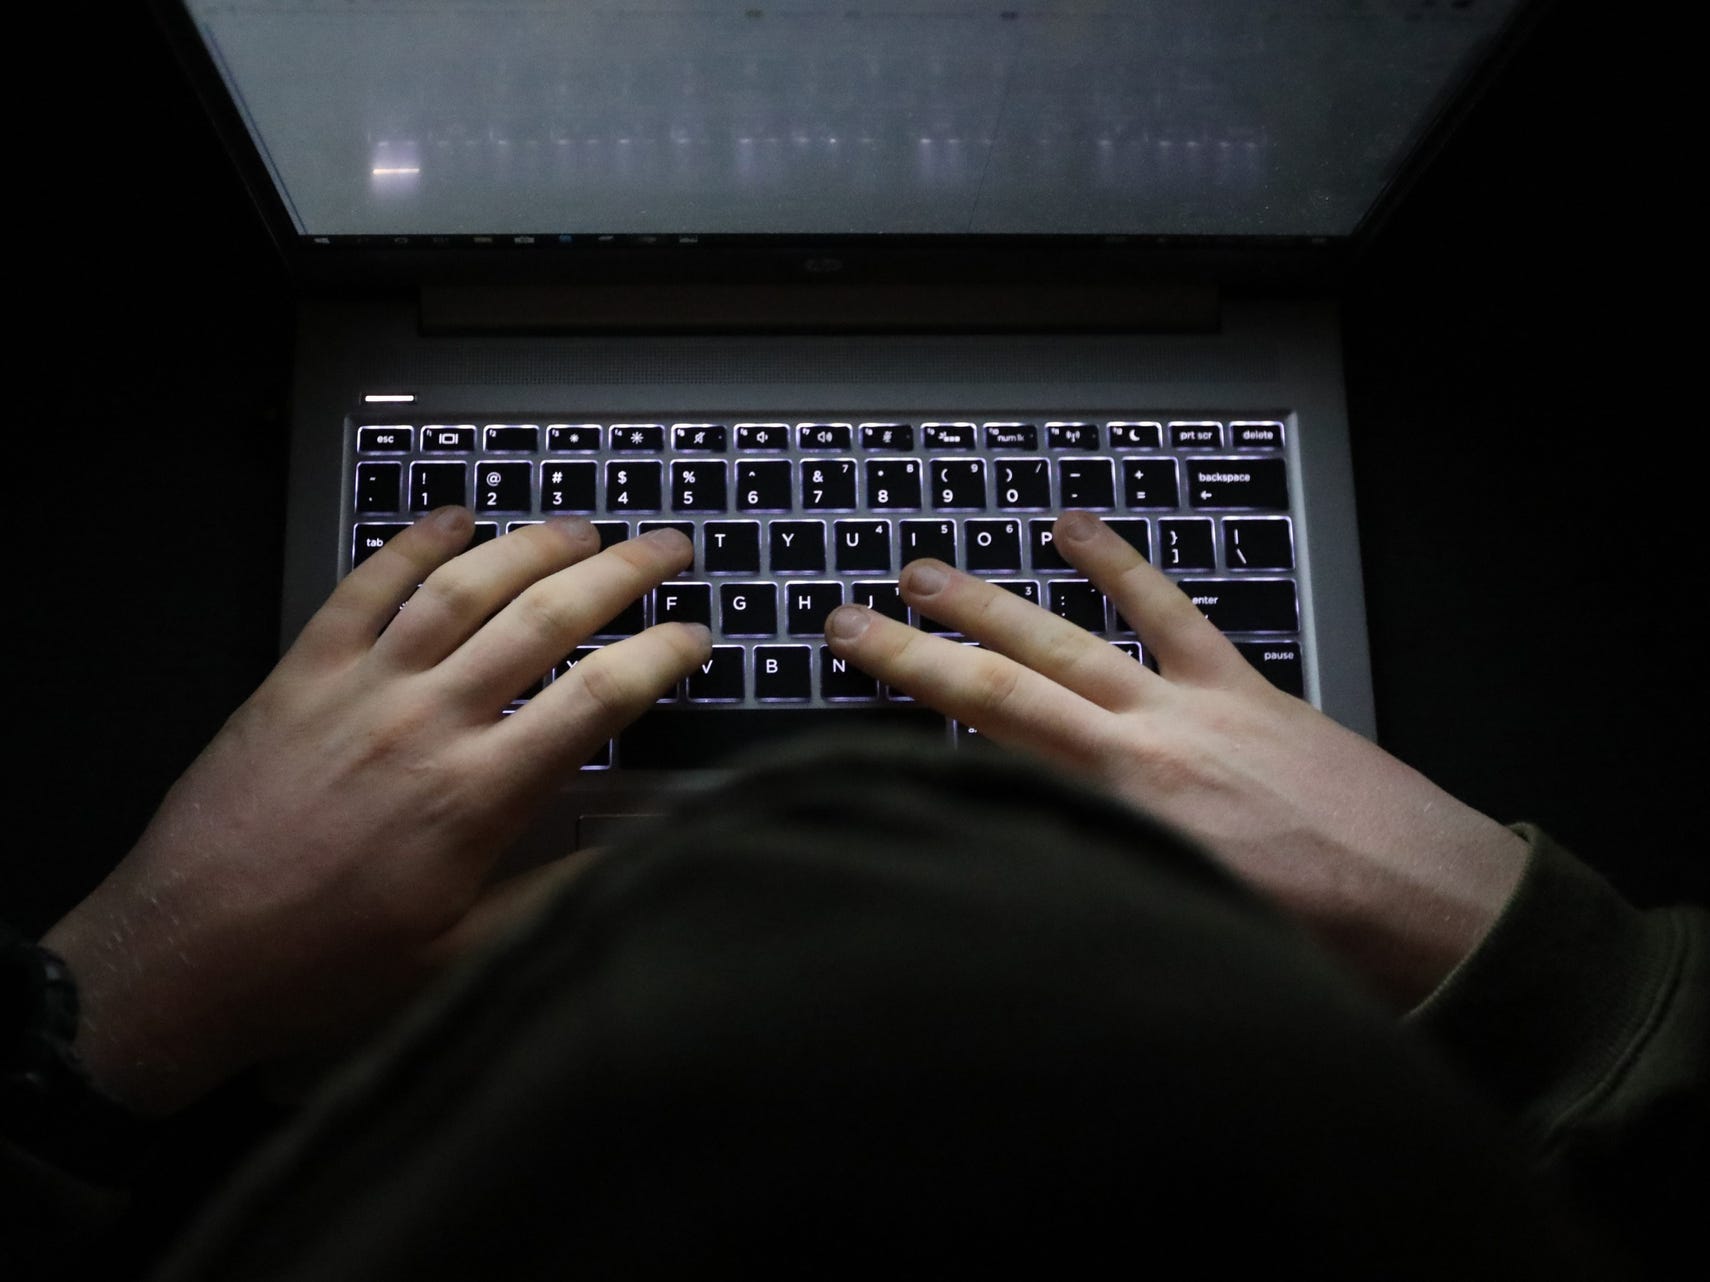 A simple, very dark night time image of hands on an illuminated keyboard typing. Shady person wearing a hood at a computer or laptop in the dark.